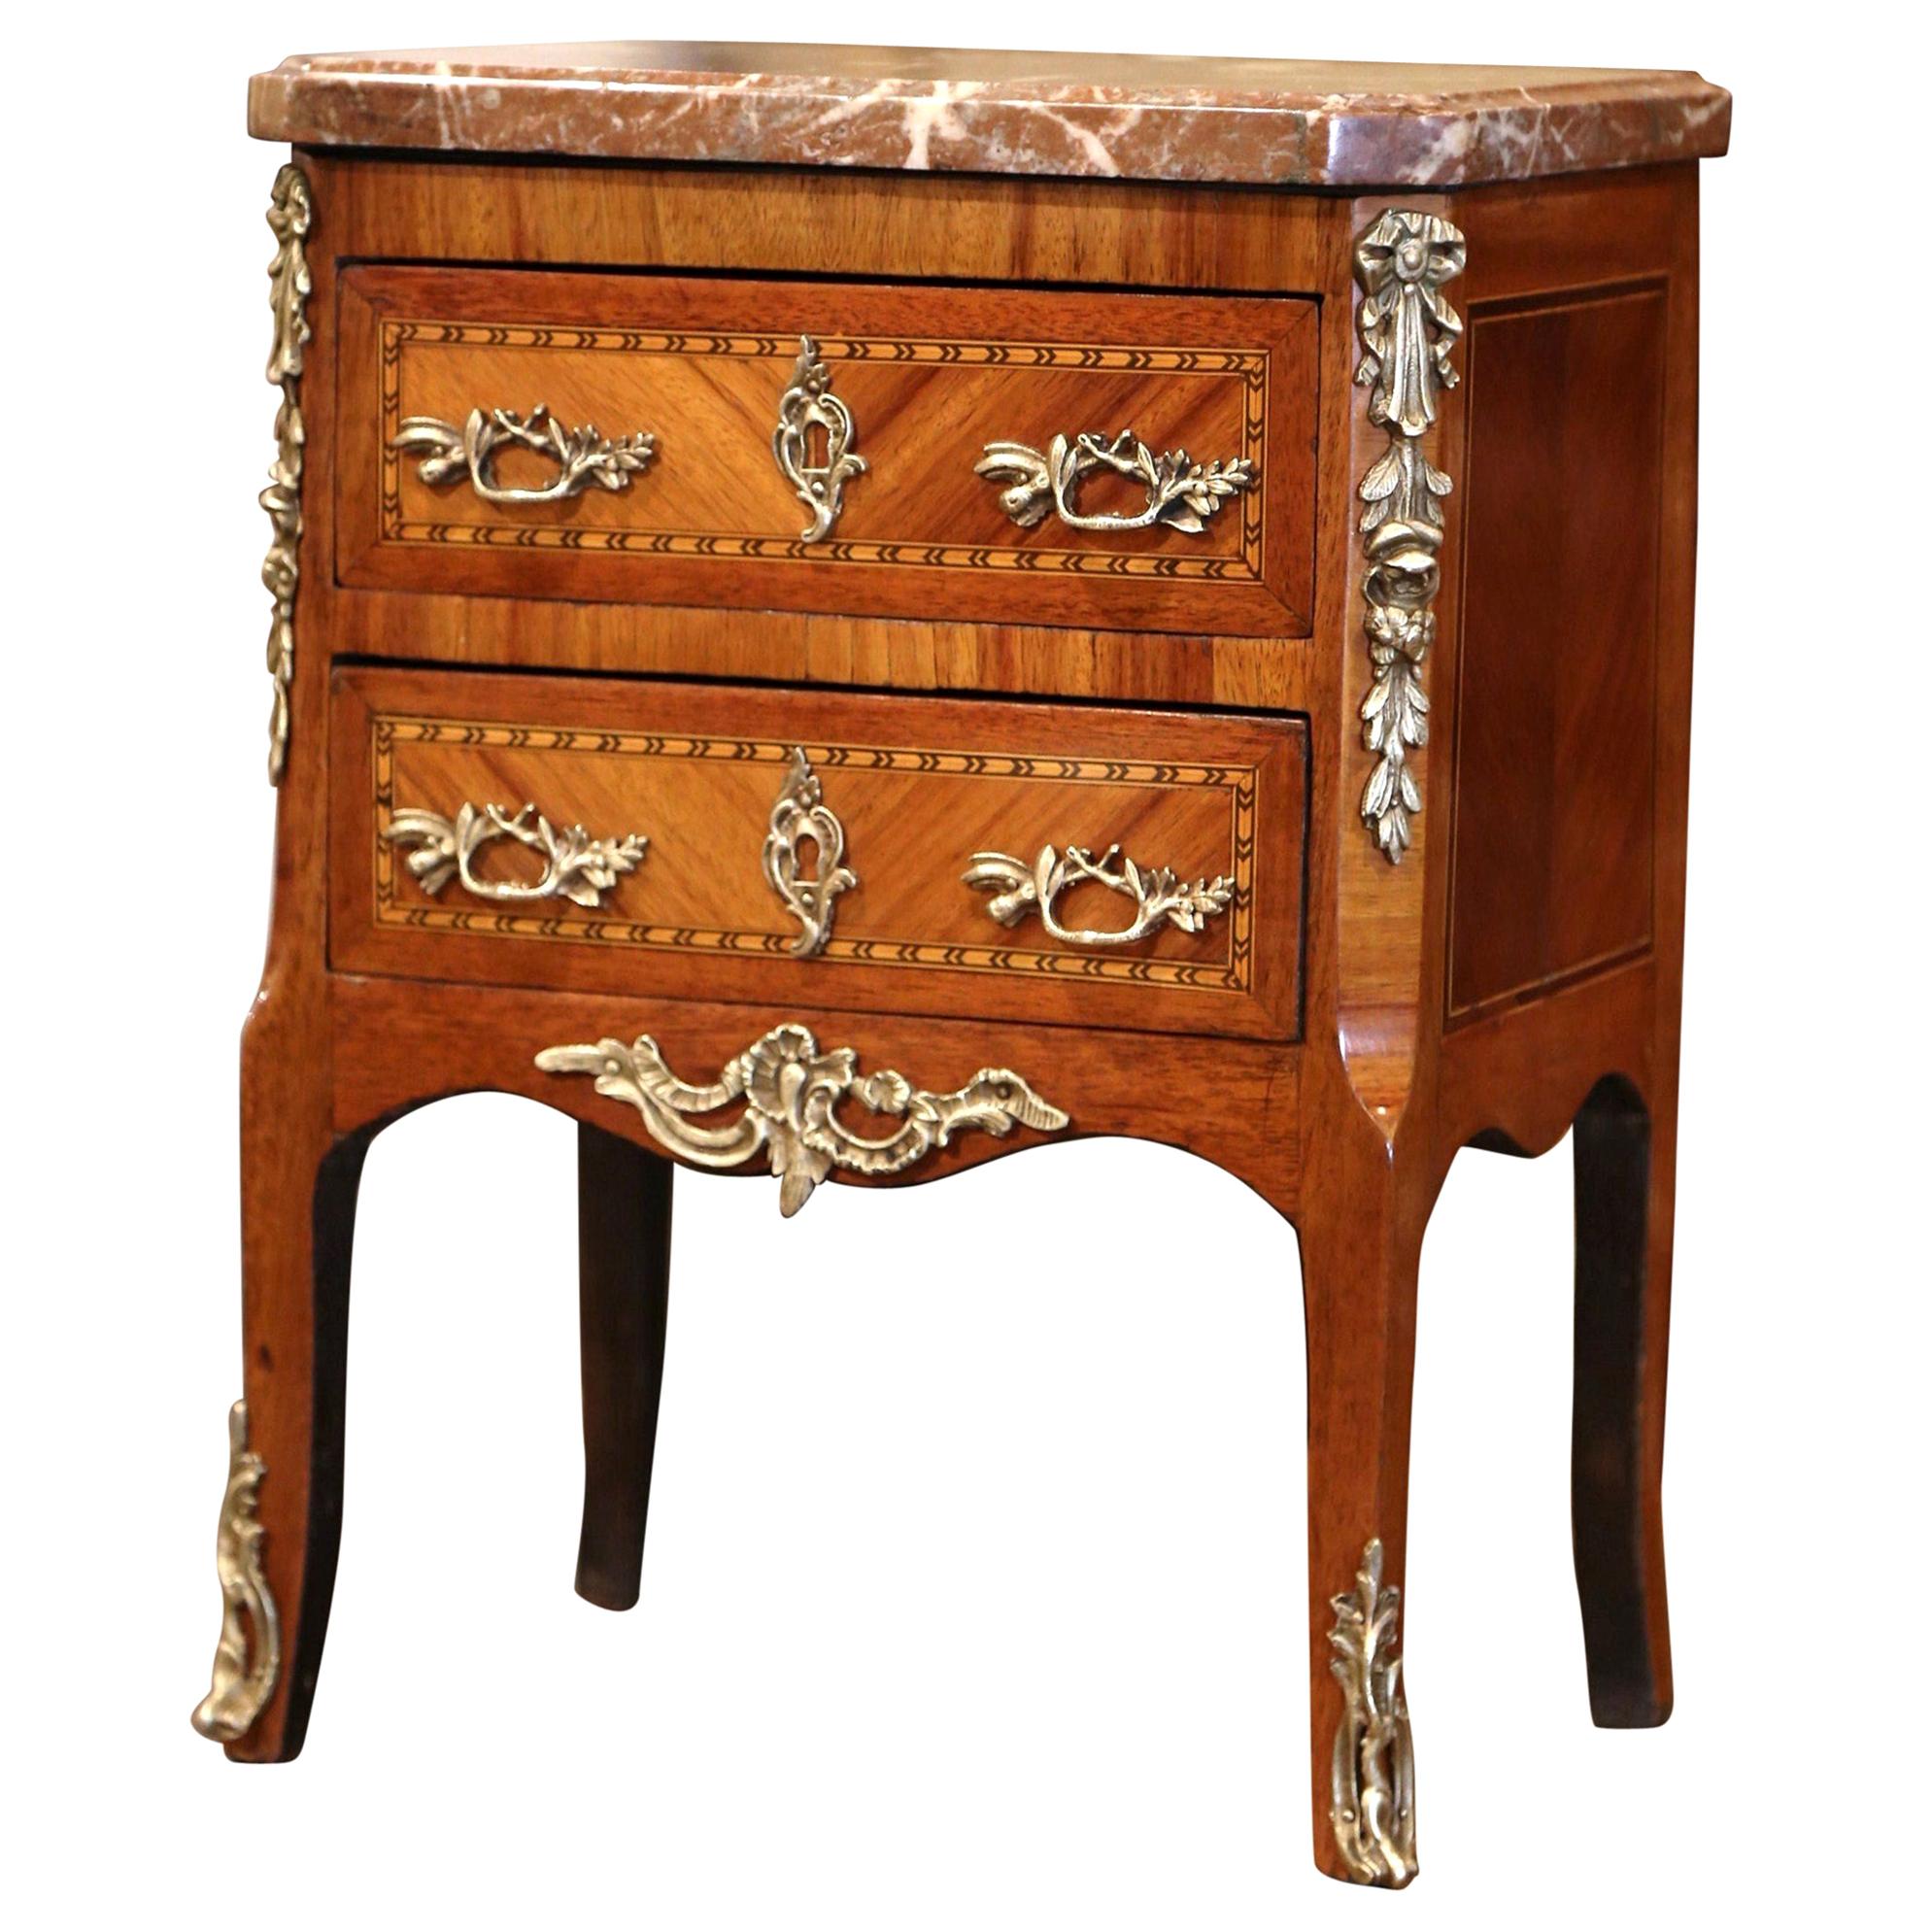 19th Century French Louis XV Marquetry and Bronze Miniature Commode with Marble